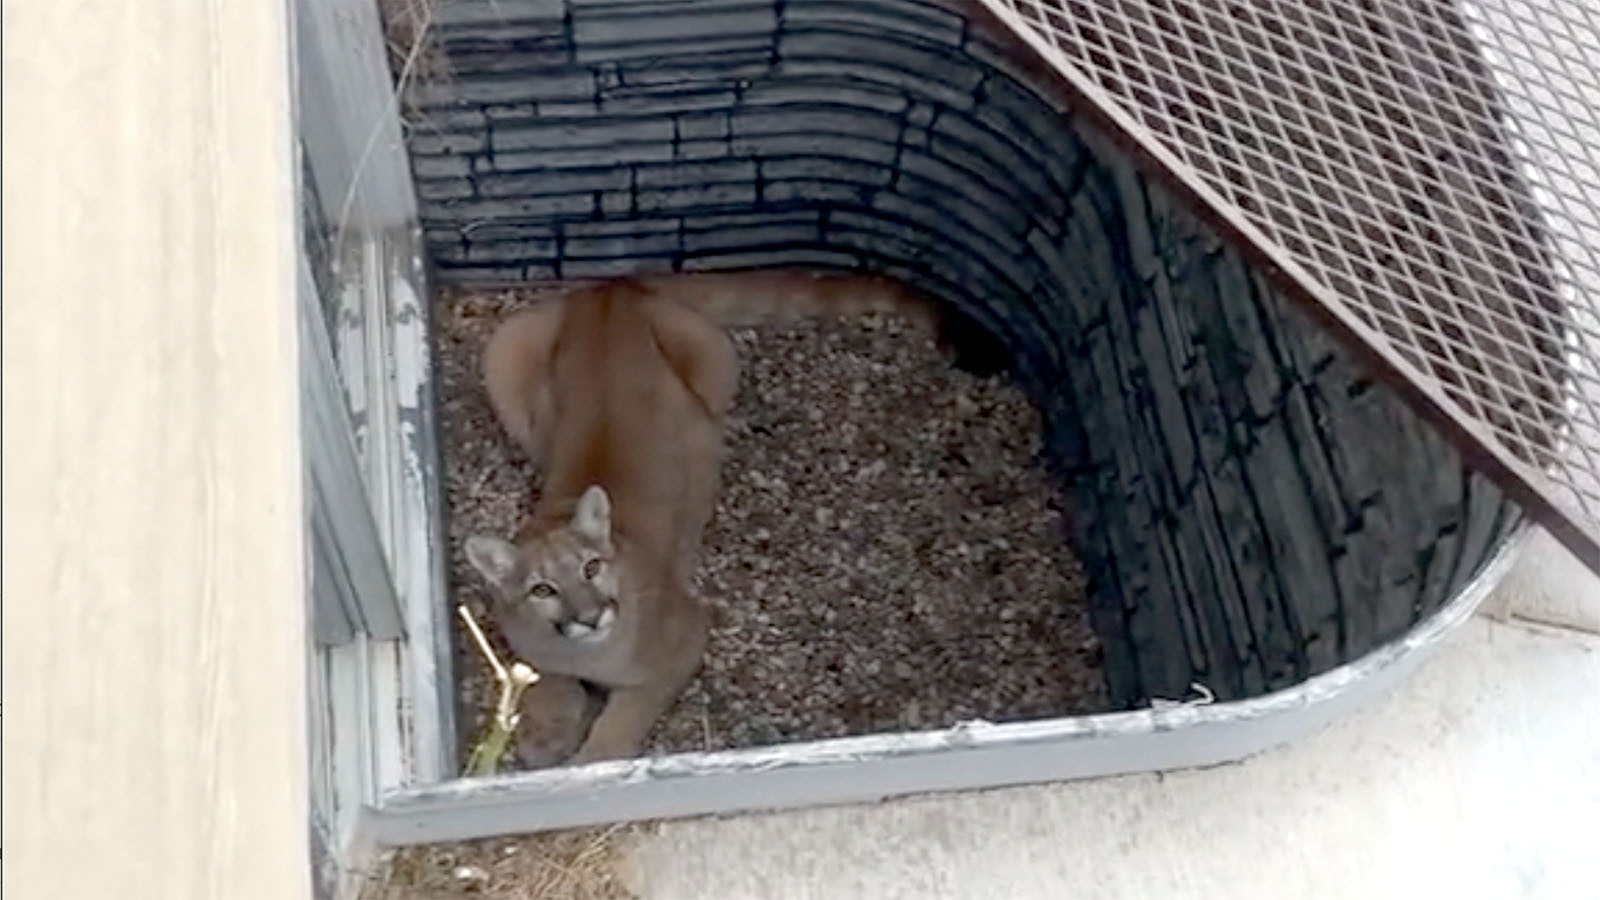 Cougar in window well 11 1 22